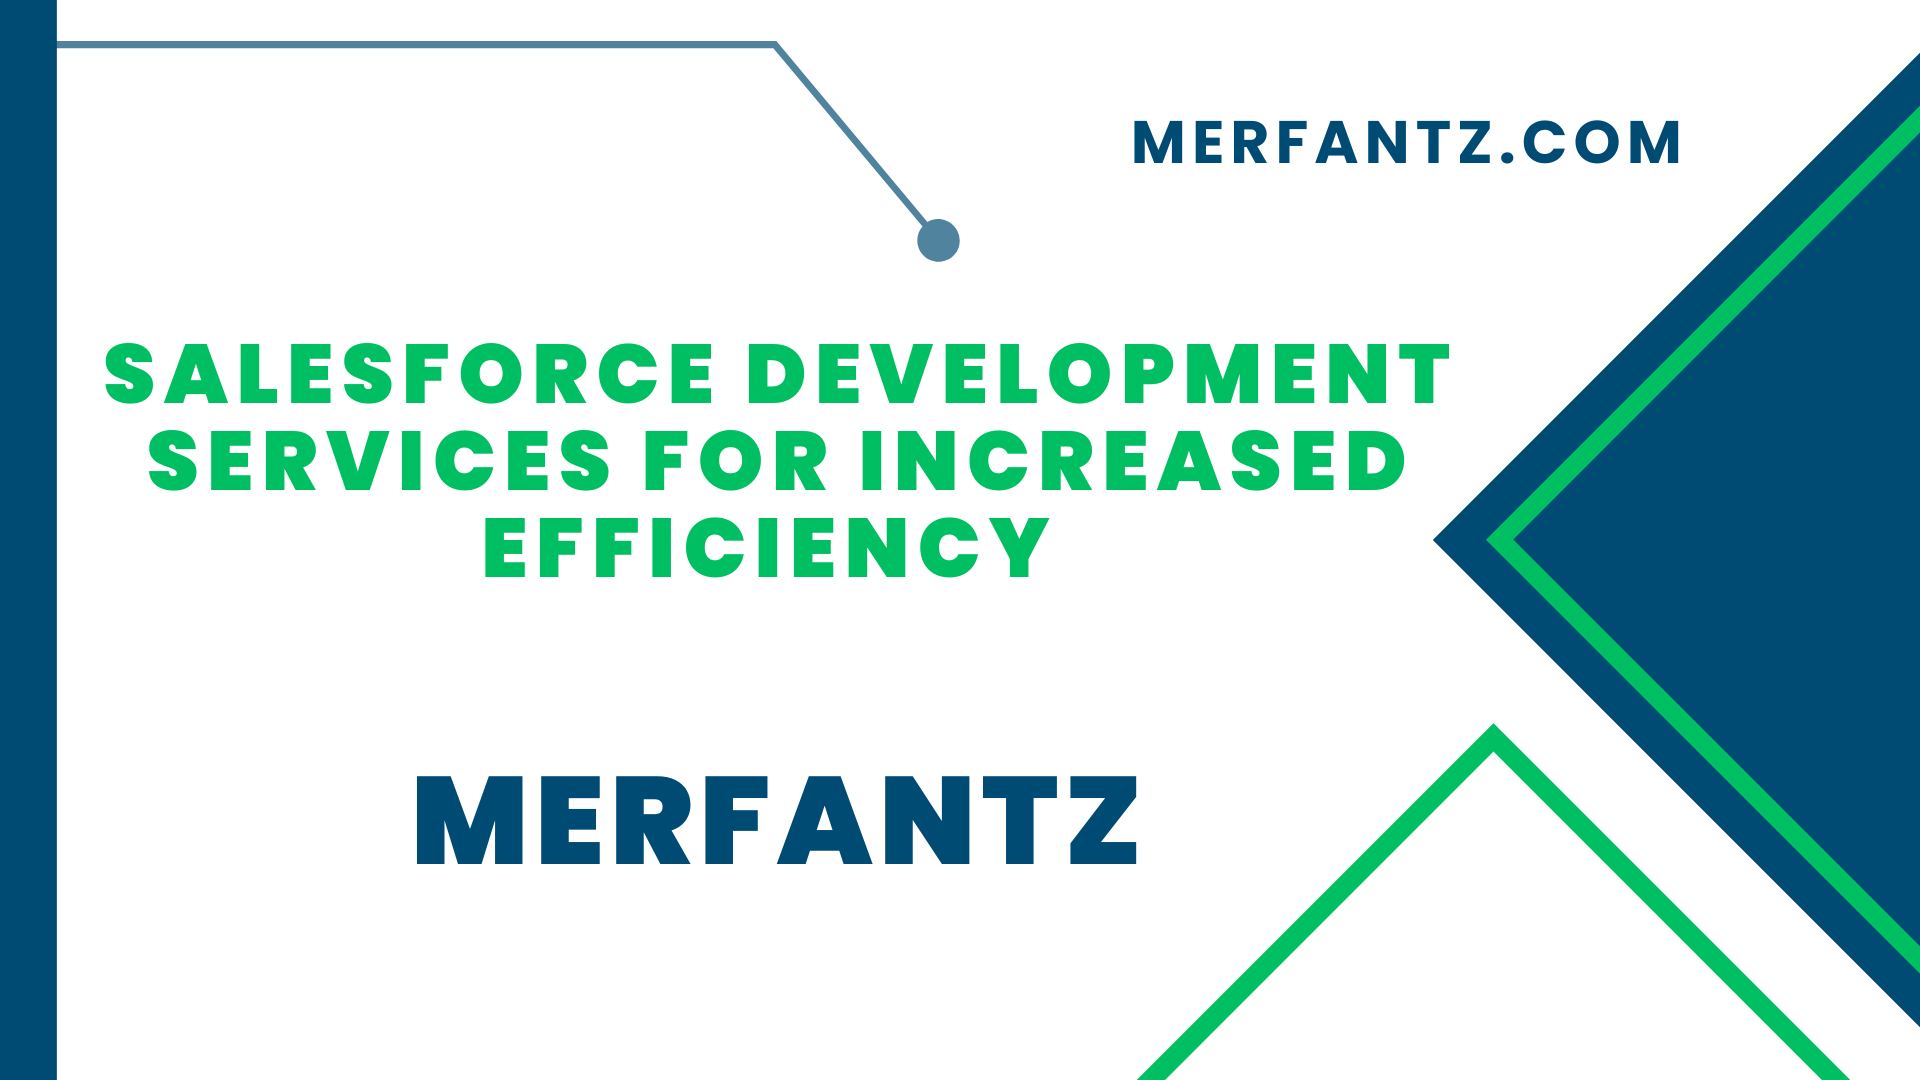 Salesforce Development Services for Increased Efficiency